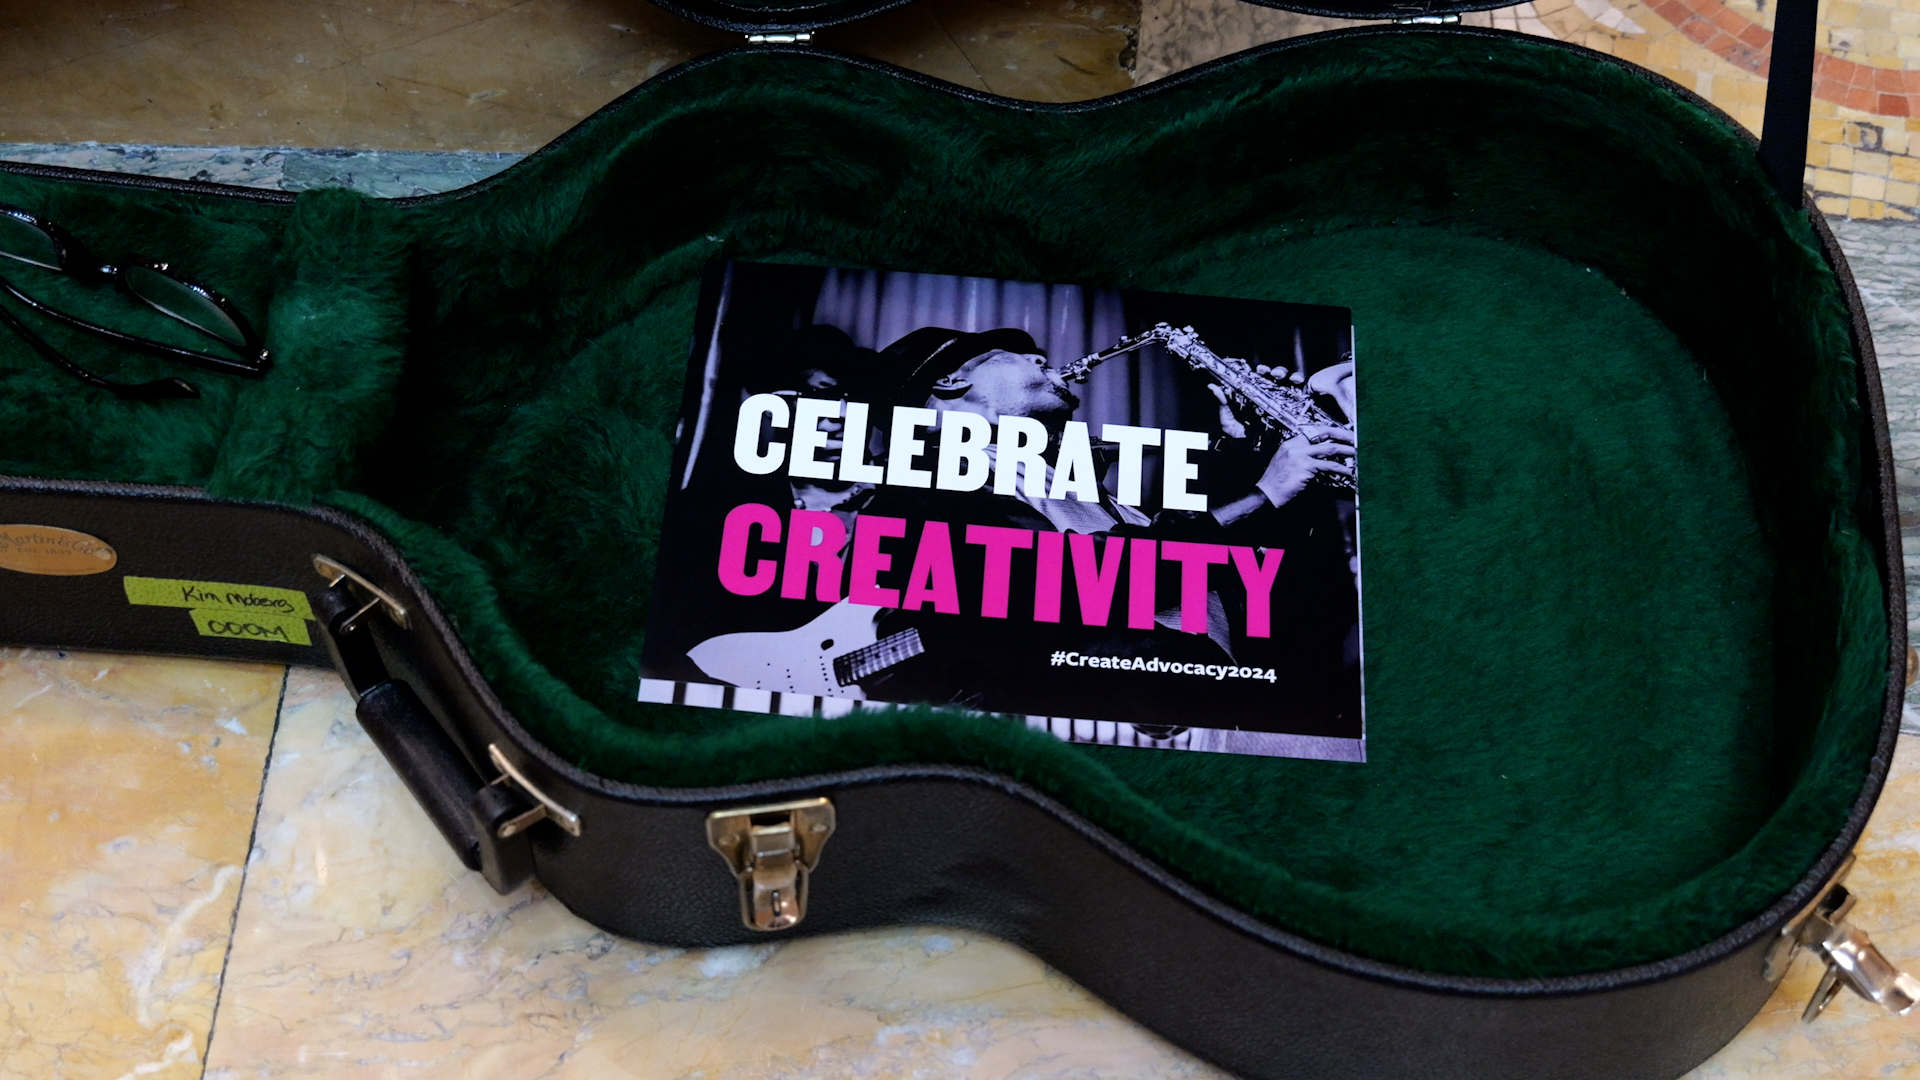 Photo of a sign that says "Celebrate Creativity" in a guitar case.